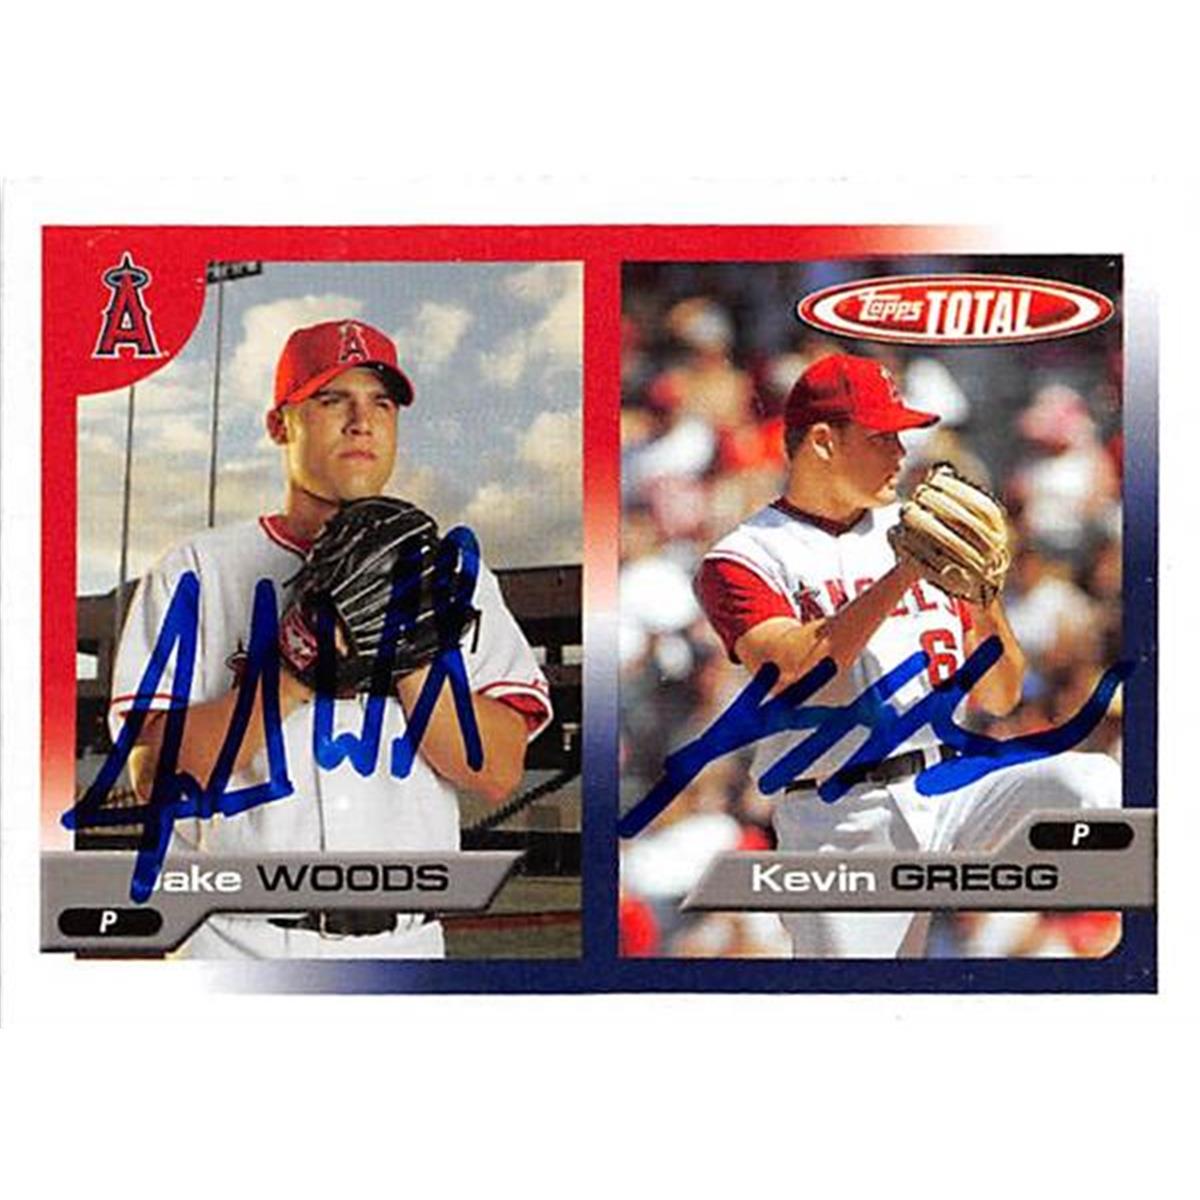 366398 Kevin Gregg Jake Woods Autographed Baseball Card - 2005 Topps Total 668 -  Autograph Warehouse